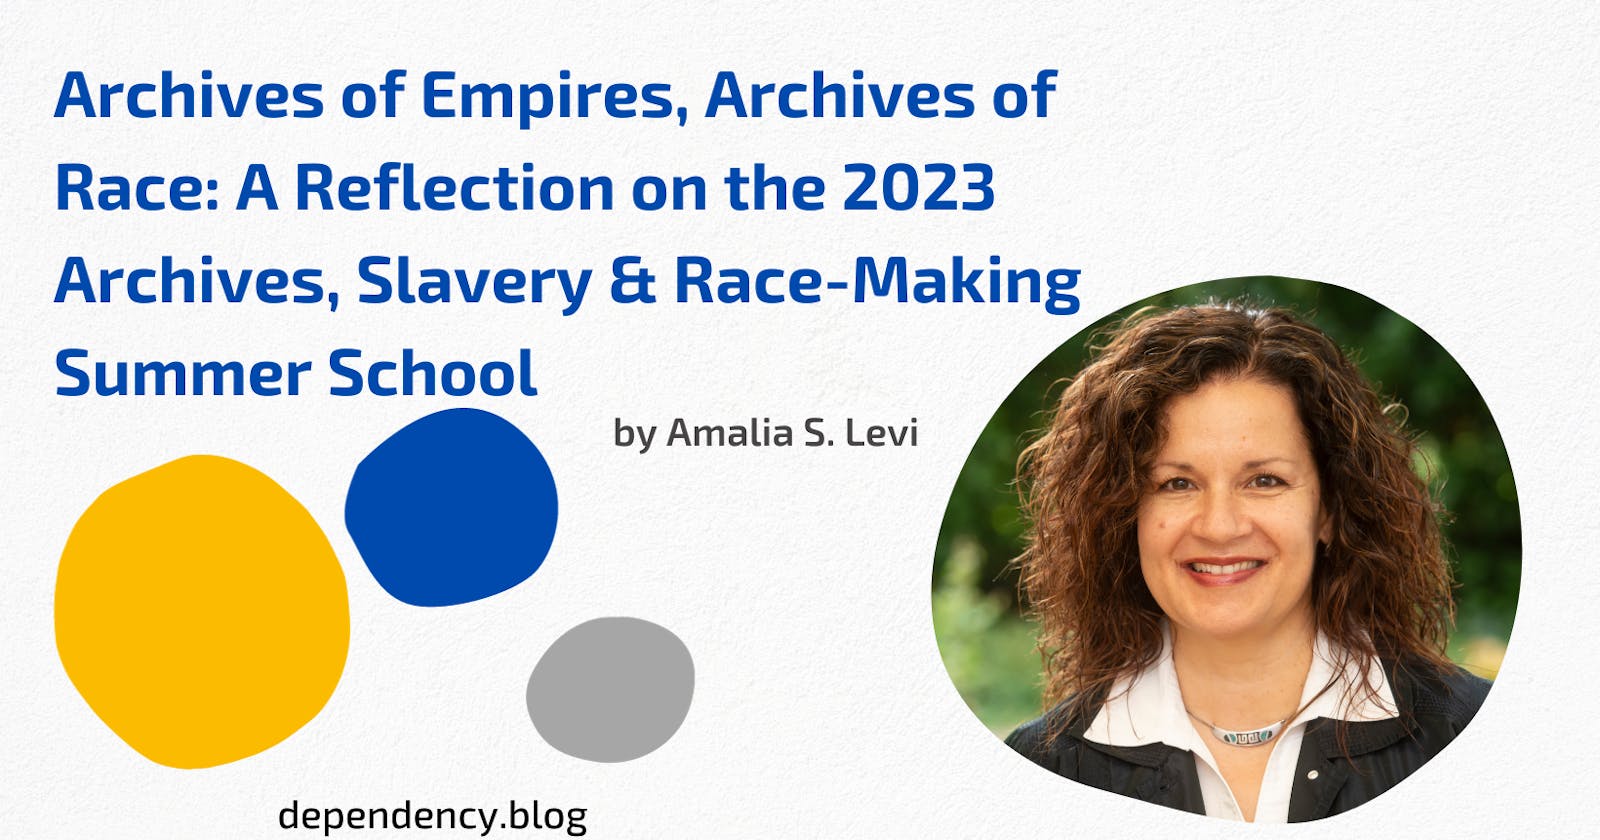 Archives of Empires, Archives of Race: A Reflection on the 2023 Archives, Slavery & Race-Making Summer School